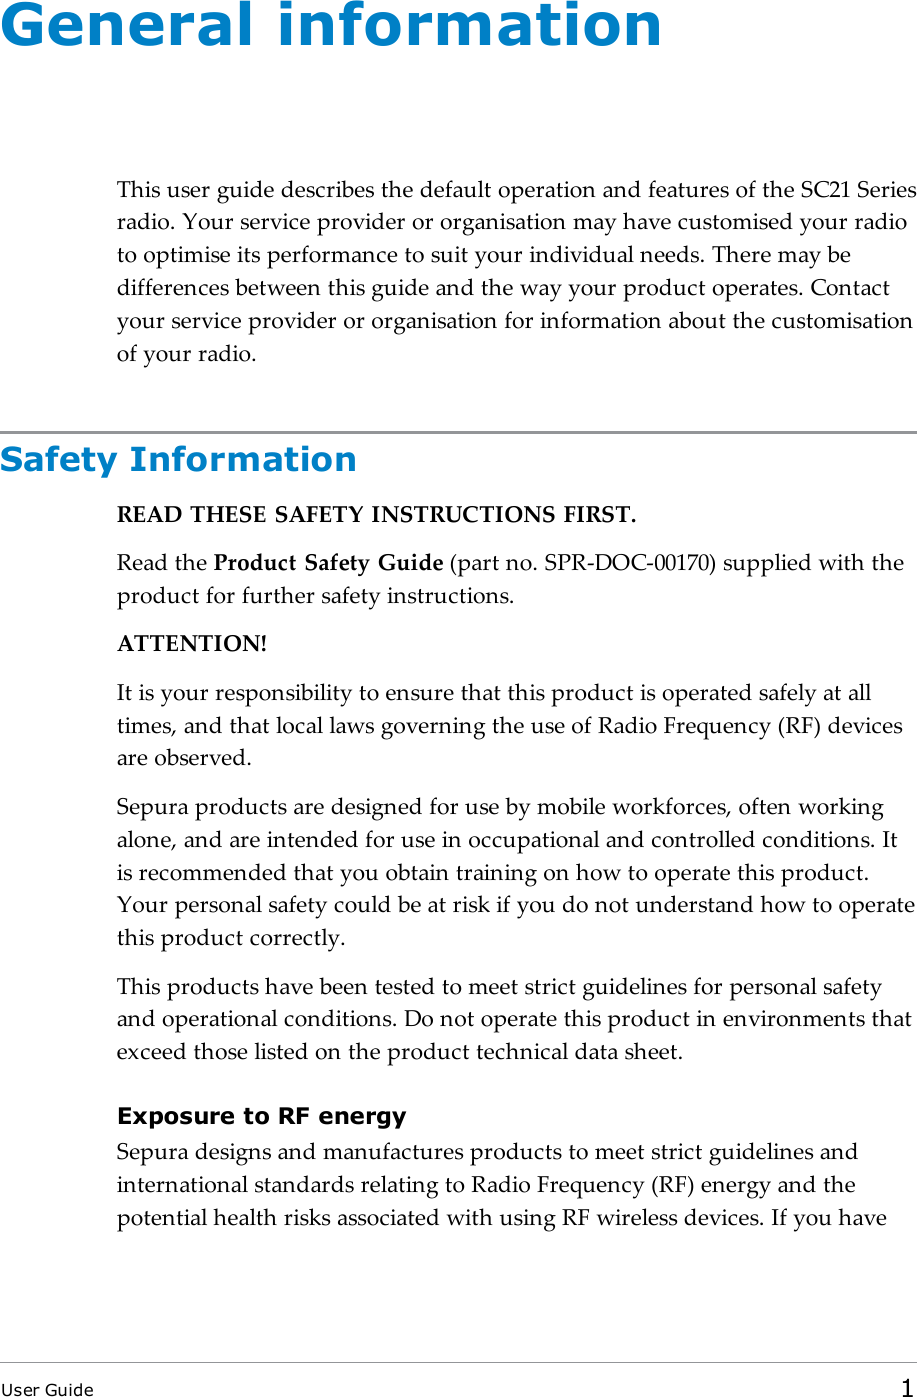 General informationThis user guide describes the default operation and features of the SC21 Seriesradio. Your service provider or organisation may have customised your radioto optimise its performance to suit your individual needs. There may bedifferences between this guide and the way your product operates. Contactyour service provider or organisation for information about the customisationof your radio.Safety InformationREADTHESESAFETYINSTRUCTIONSFIRST.Read the Product Safety Guide (part no. SPR-DOC-00170) supplied with theproduct for further safety instructions.ATTENTION!It is your responsibility to ensure that this product is operated safely at alltimes, and that local laws governing the use of Radio Frequency (RF) devicesare observed.Sepura products are designed for use by mobile workforces, often workingalone, and are intended for use in occupational and controlled conditions. Itis recommended that you obtain training on how to operate this product.Your personal safety could be at risk if you do not understand how to operatethis product correctly.This products have been tested to meet strict guidelines for personal safetyand operational conditions. Do not operate this product in environments thatexceed those listed on the product technical data sheet.Exposure to RF energySepura designs and manufactures products to meet strict guidelines andinternational standards relating to Radio Frequency (RF) energy and thepotential health risks associated with using RF wireless devices. If you haveUser Guide 1